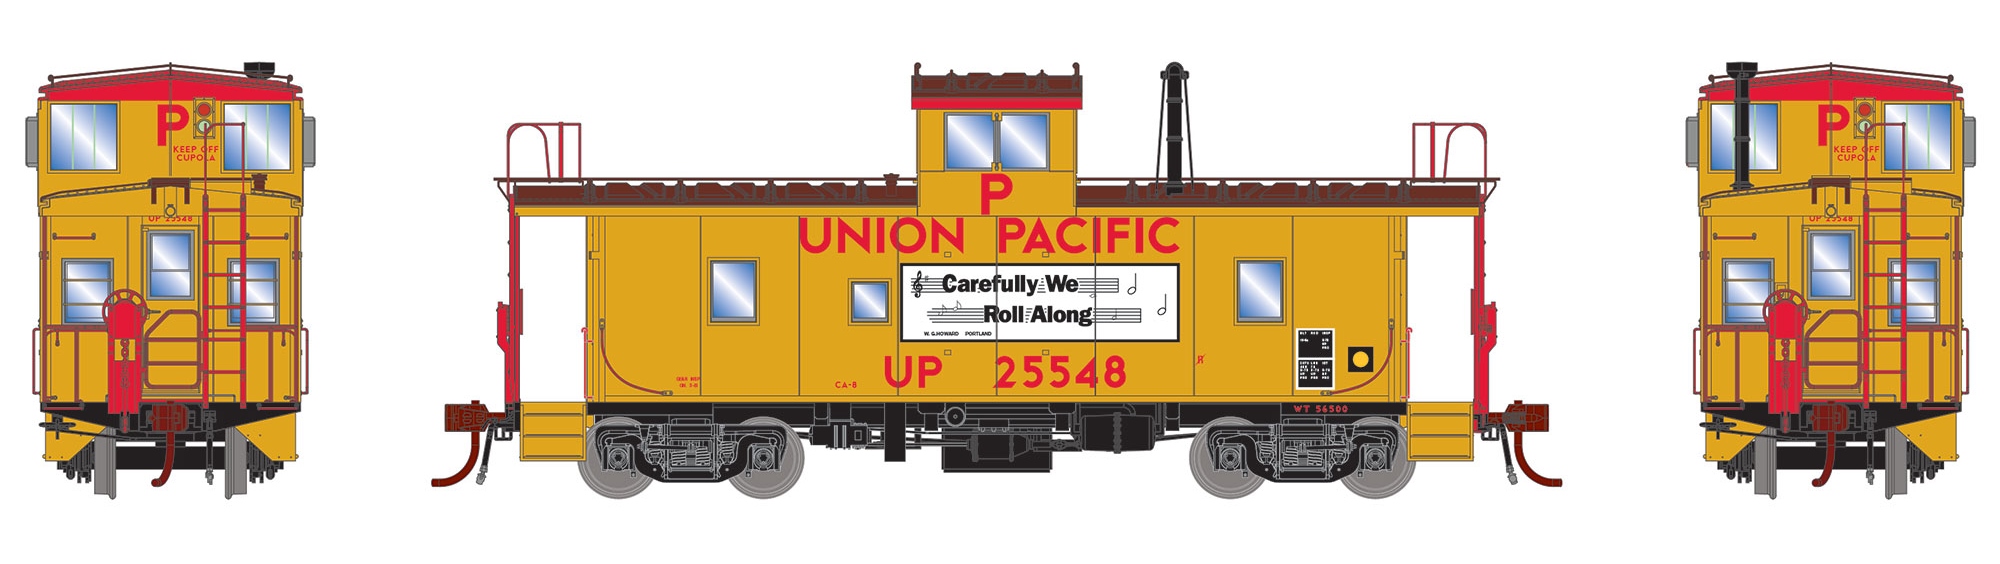 Athearn Genesis HO ATHG78558 DCC/NCE Equipped CA-8 Late Caboose w/Lights Union Pacific UP #25548